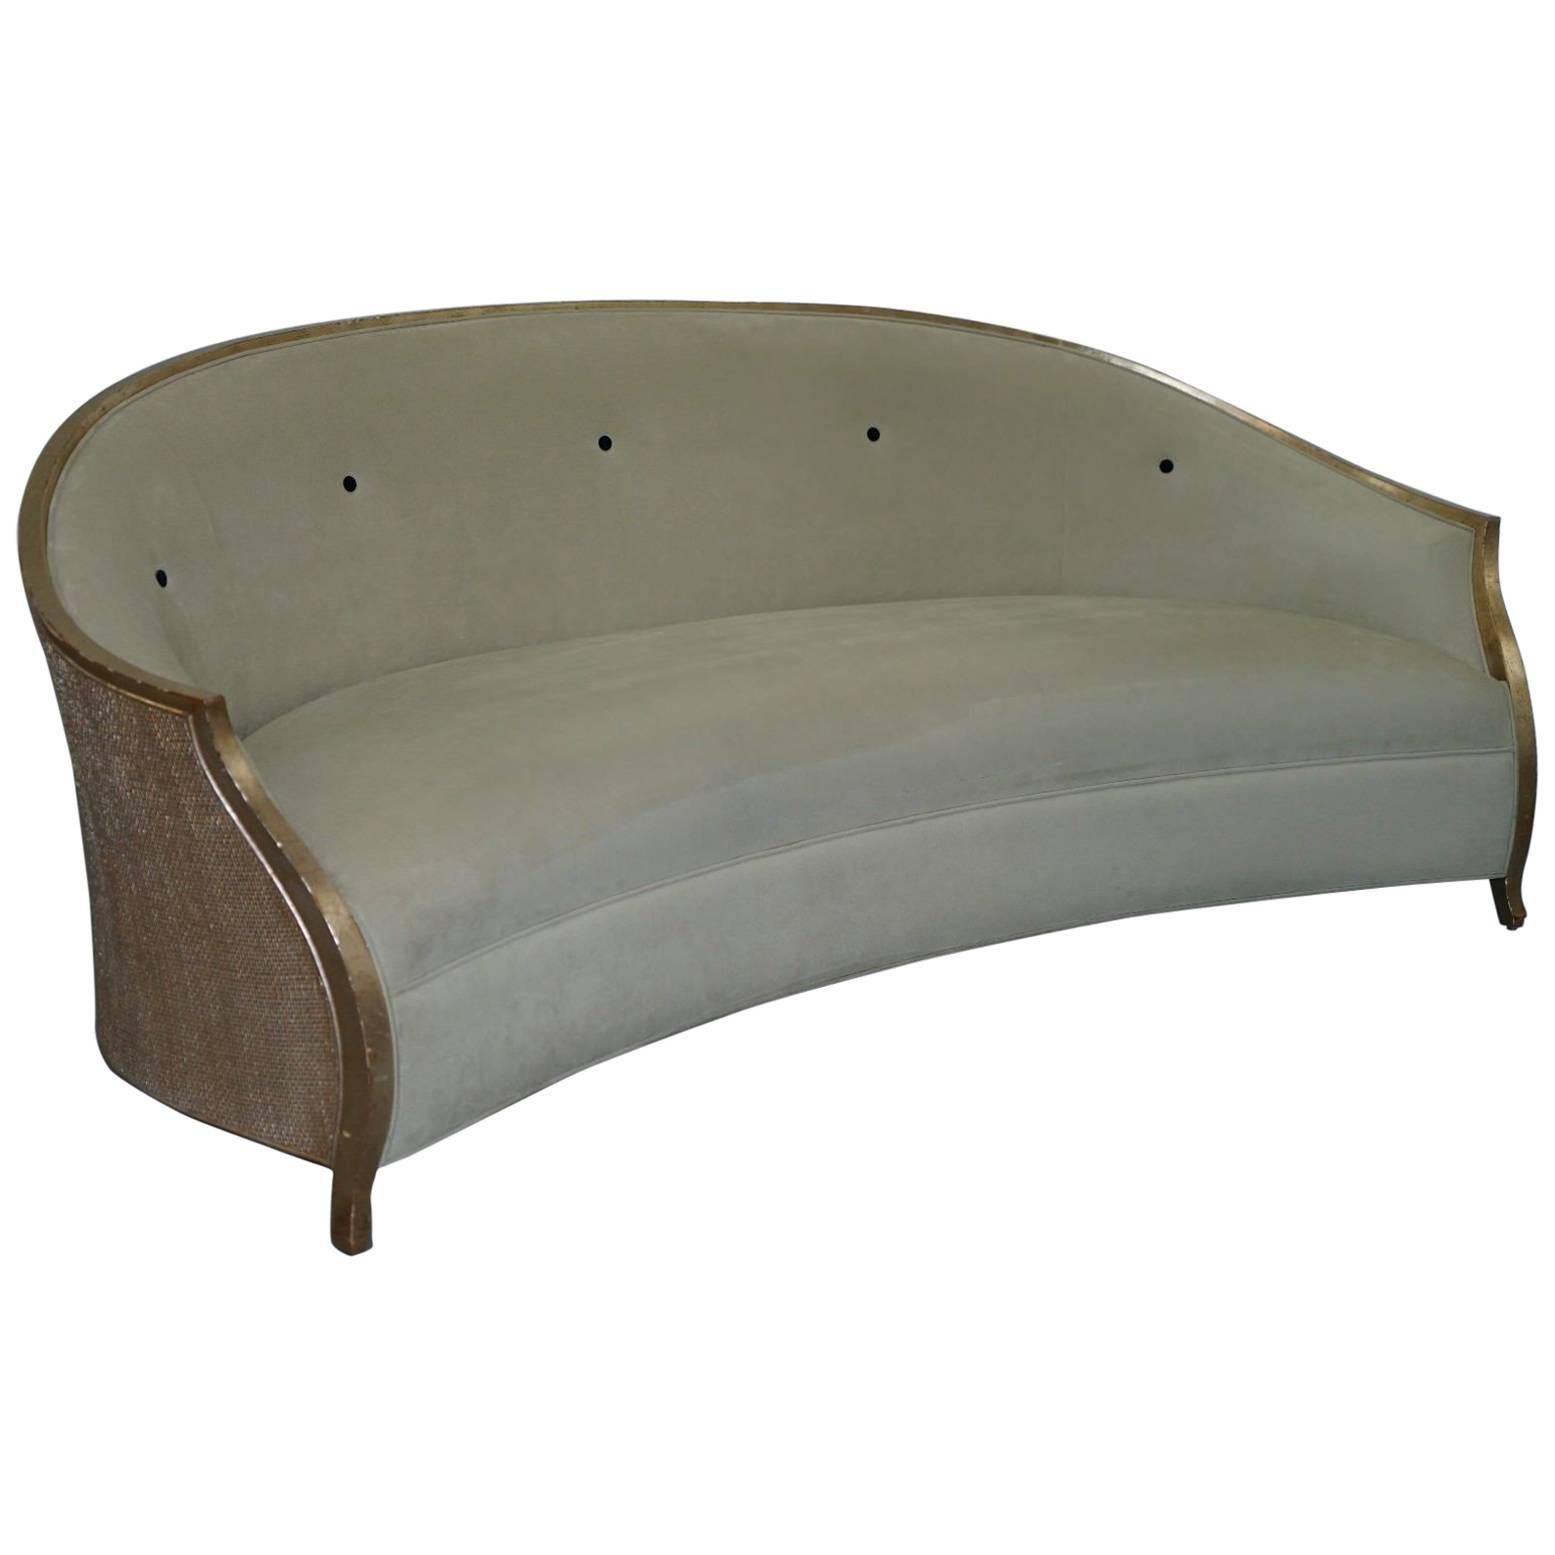 Christopher Guy Suede Leather Upholstery Curved Sofa Gold Leaf Paint